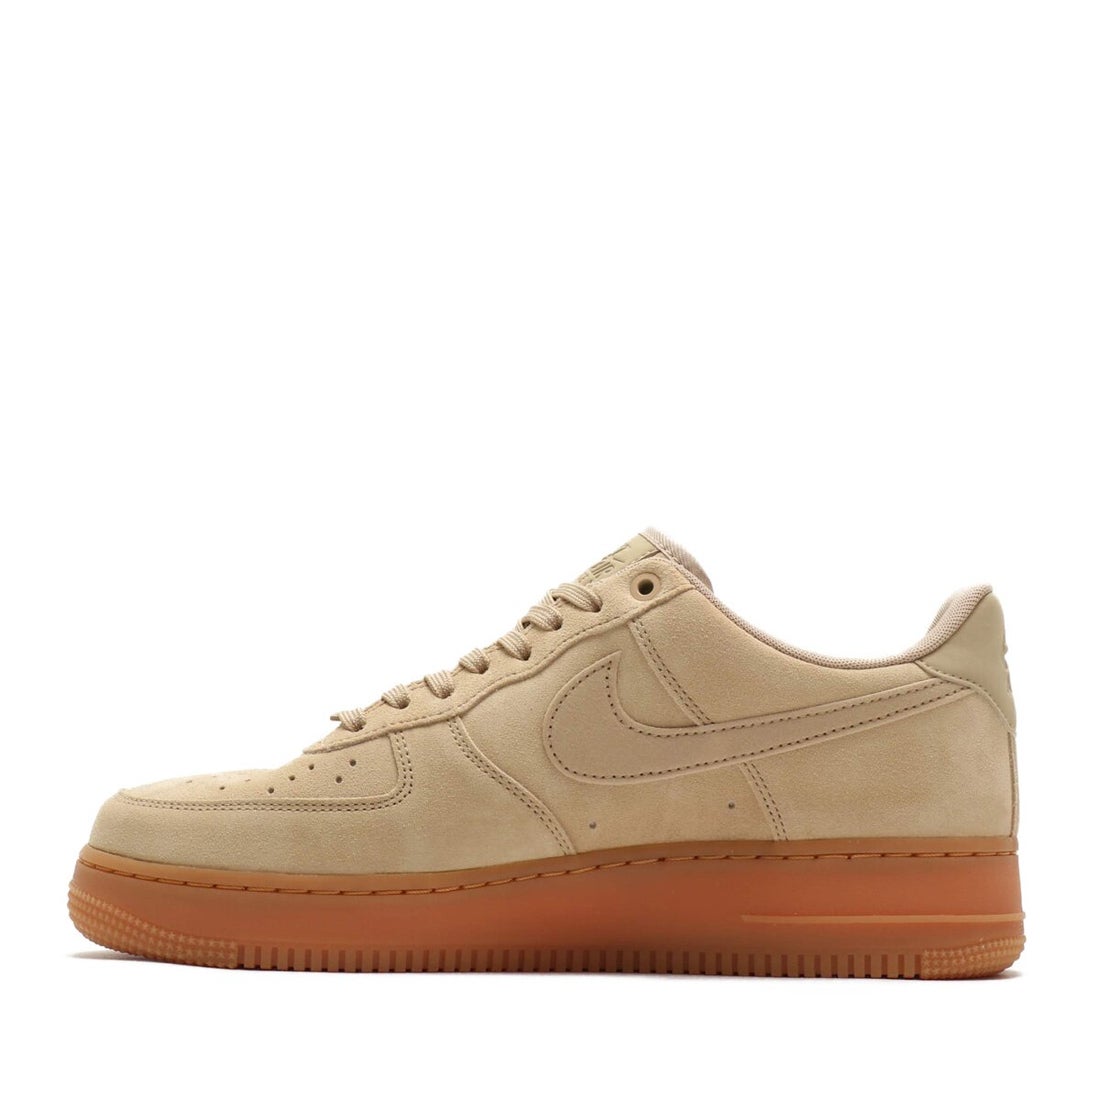 NIKE AIR FORCE 1 07 LV8 SUEDE 